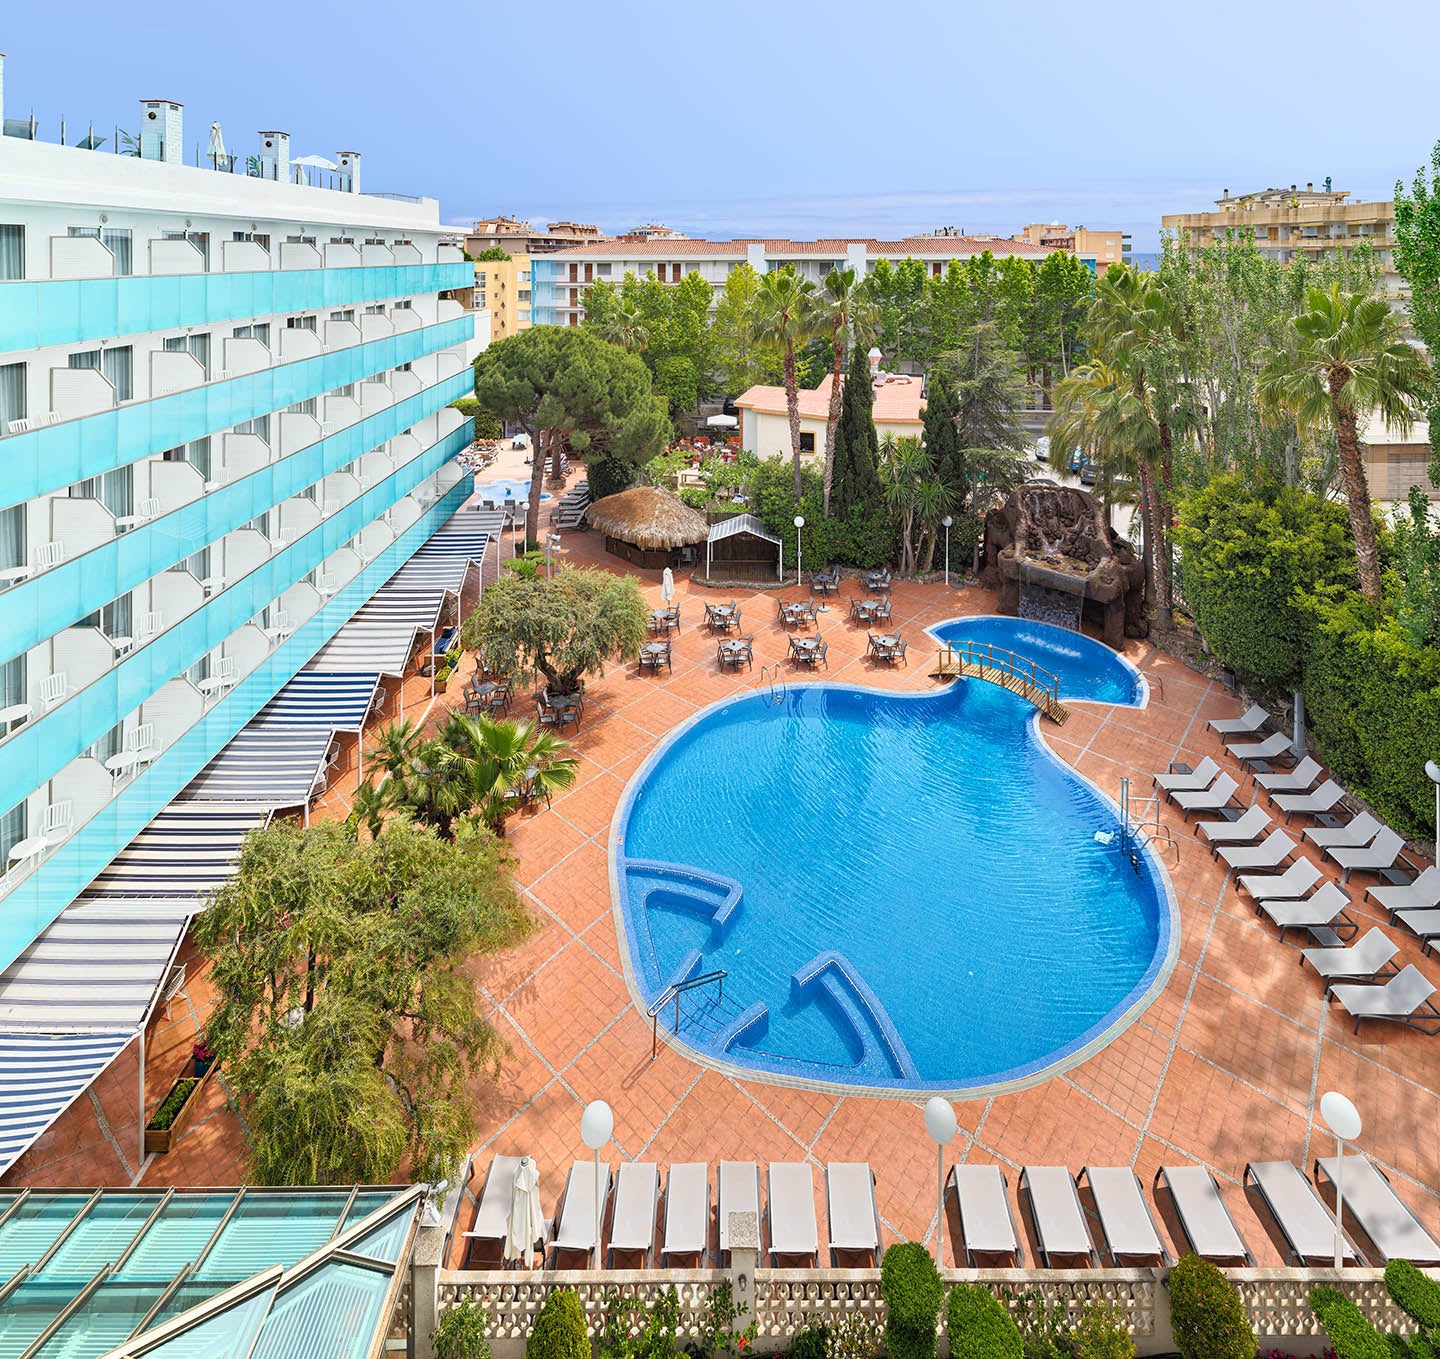 General view of the hotel and the swimming pool